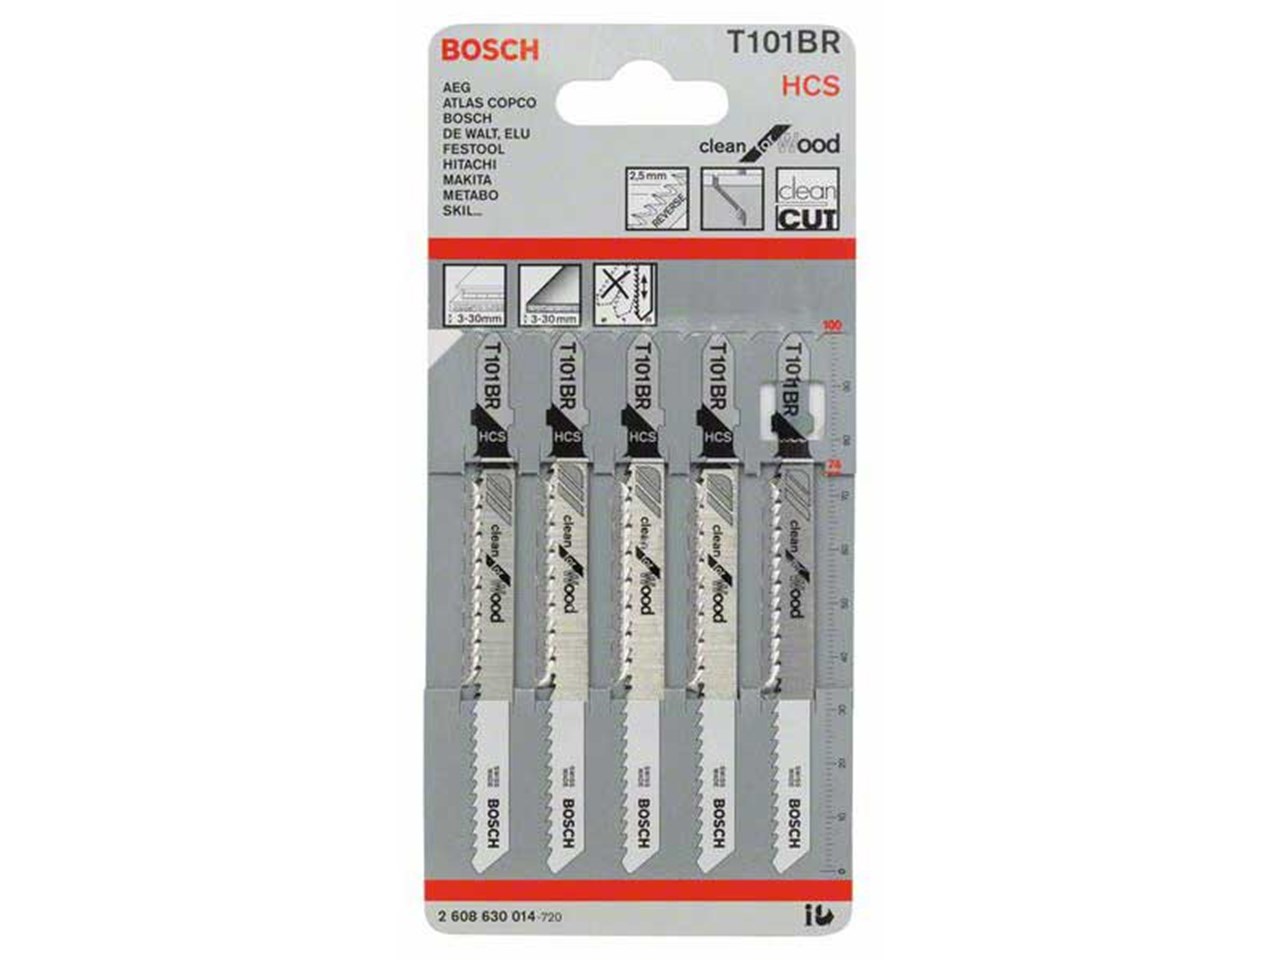 Bosch T101br Reversible Pitch Clean For Wood Jigsaw Blades X 5